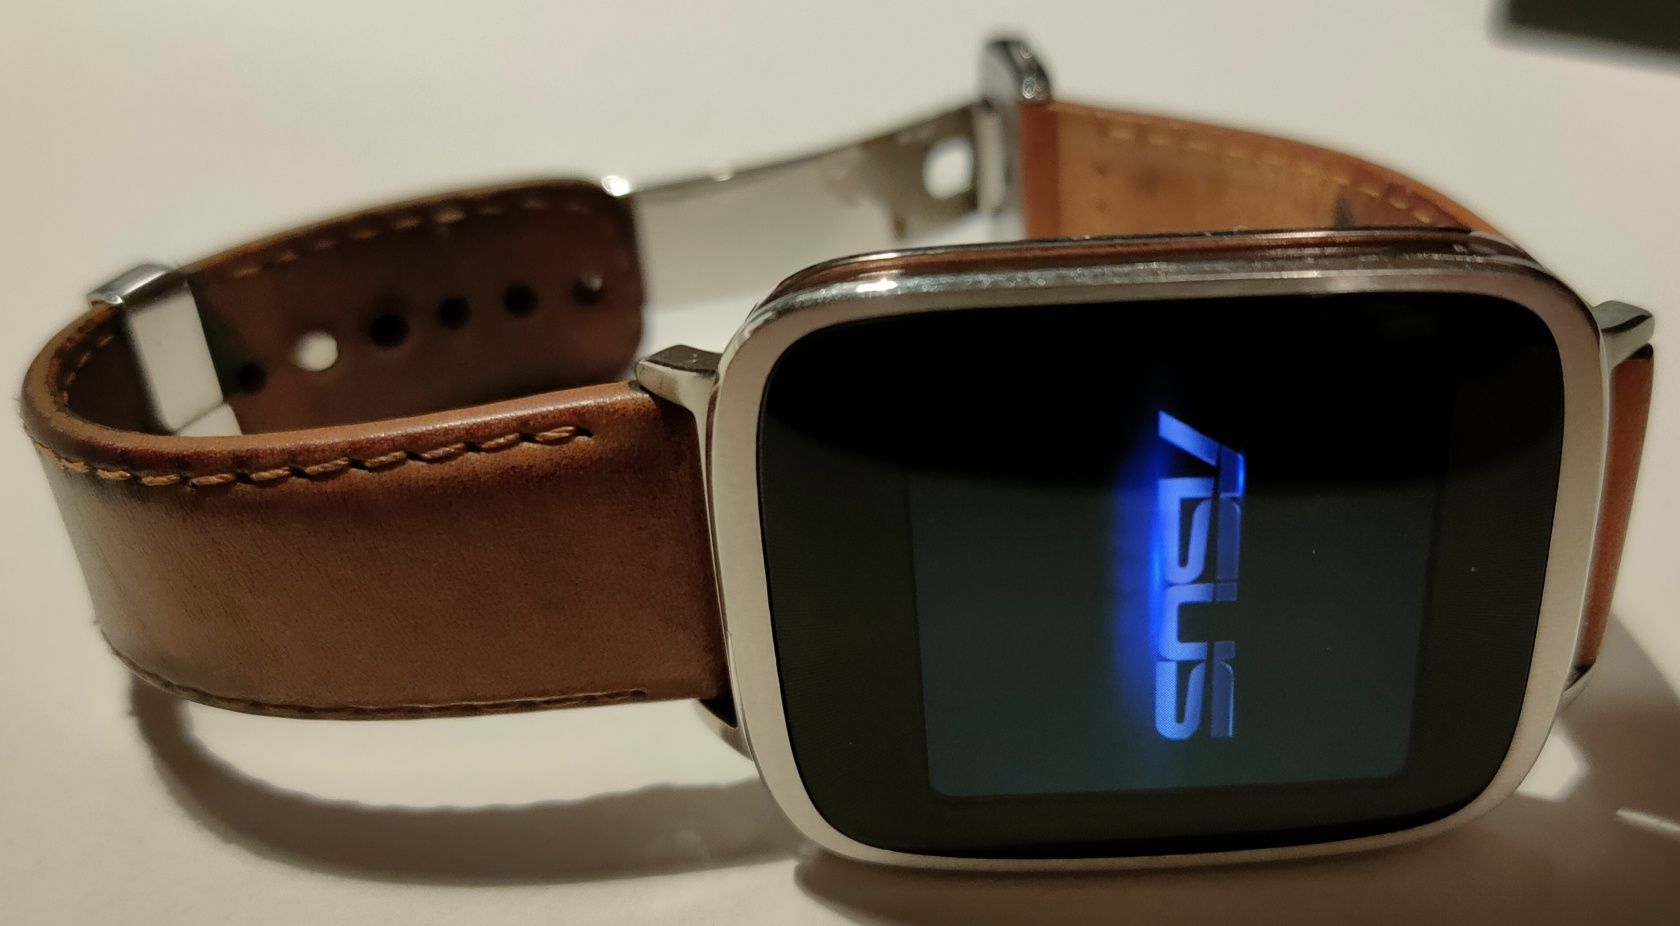 ASUS ZenWatch WI500Q Android